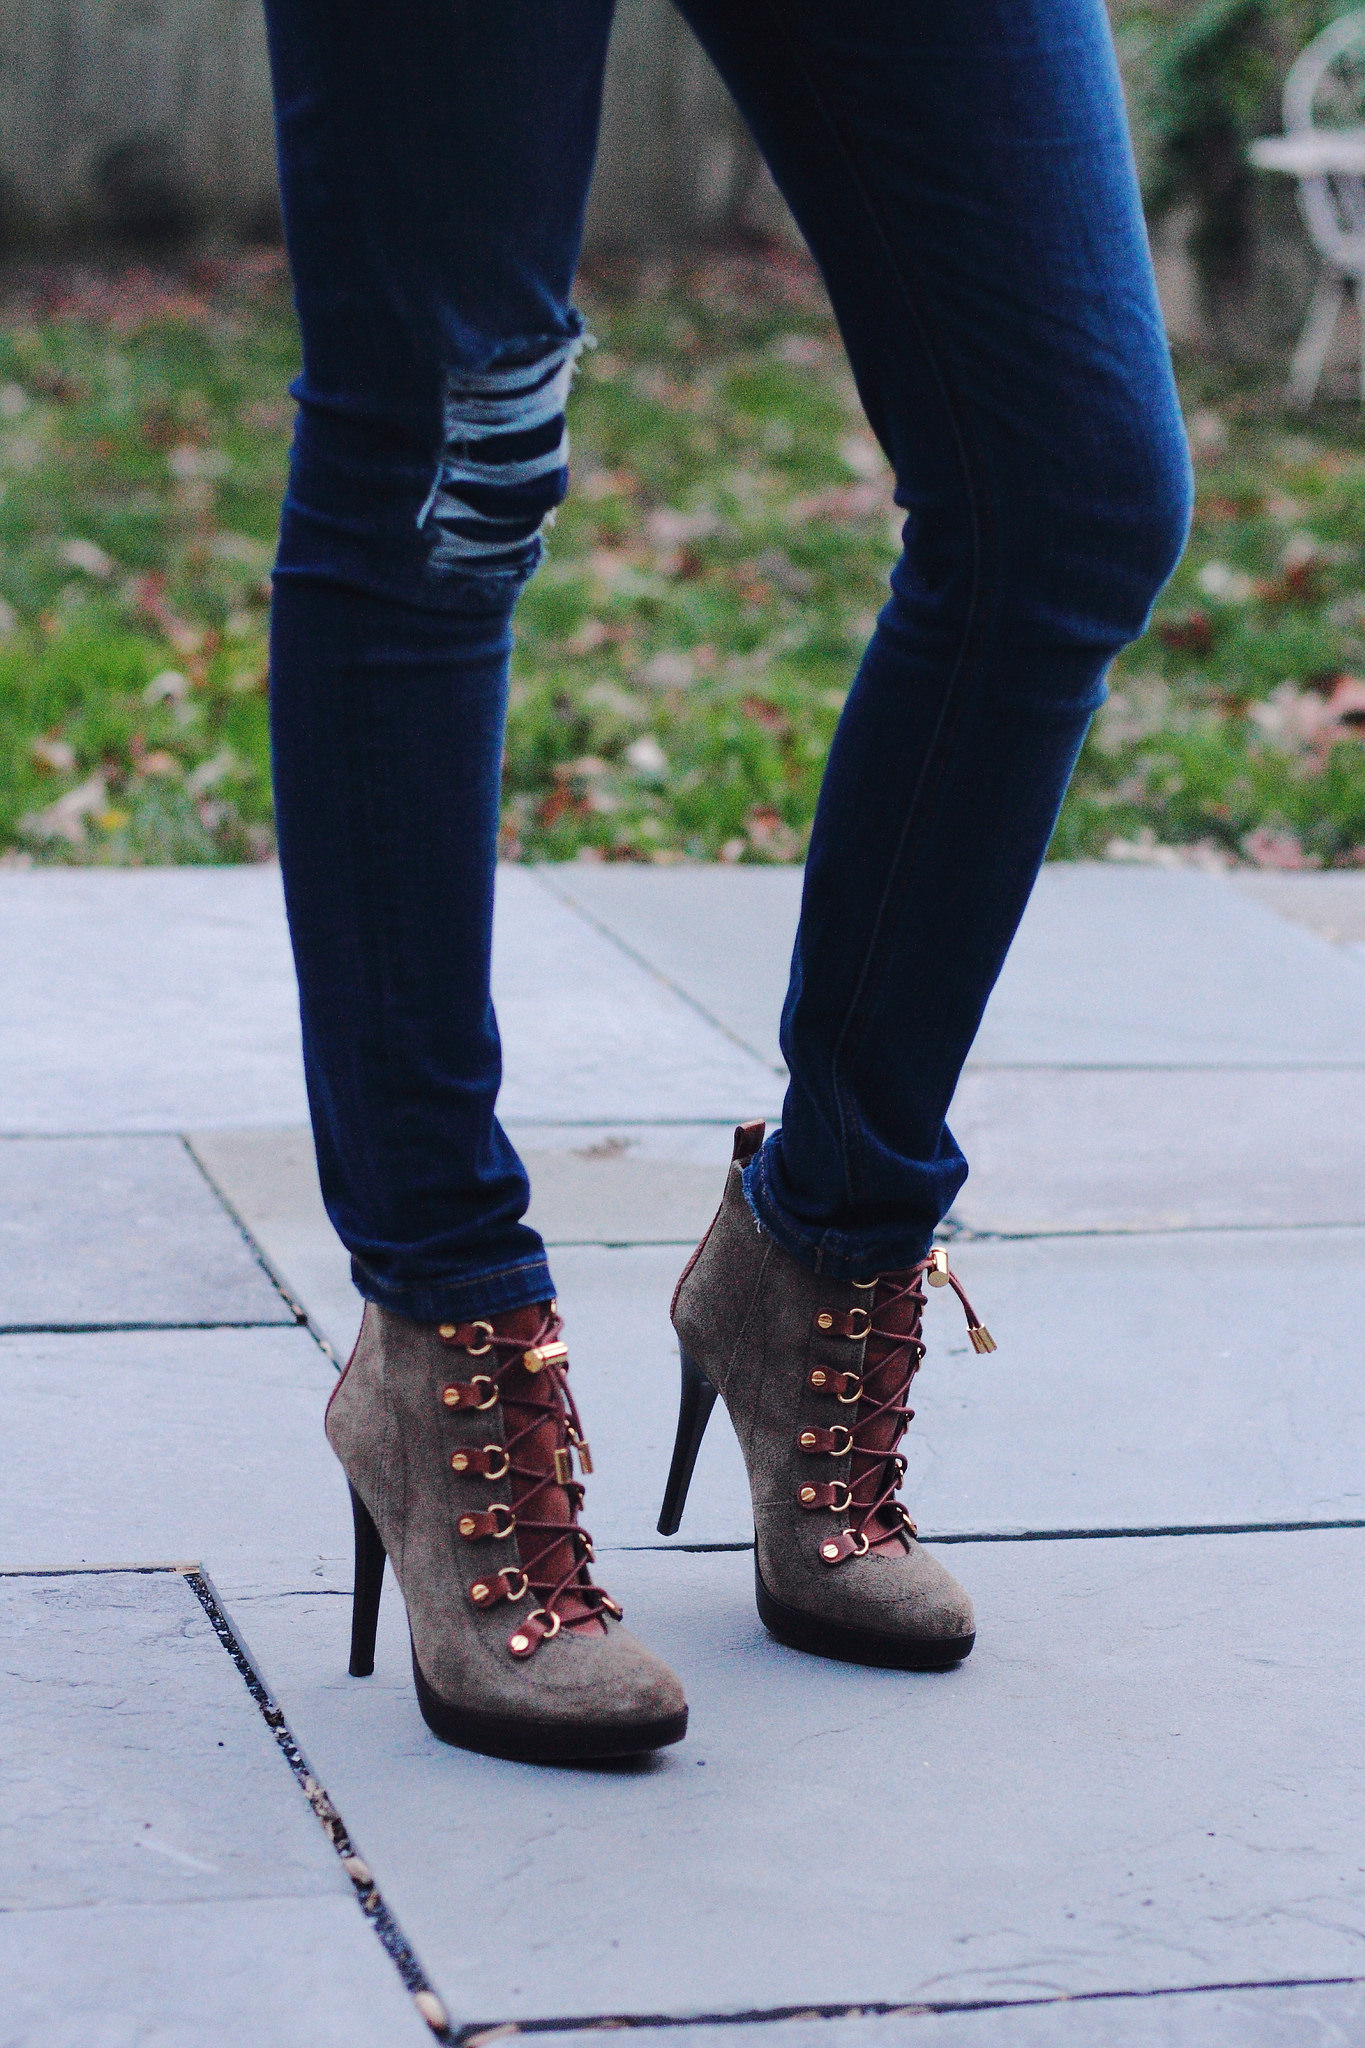 Tory Burch lace-up boots